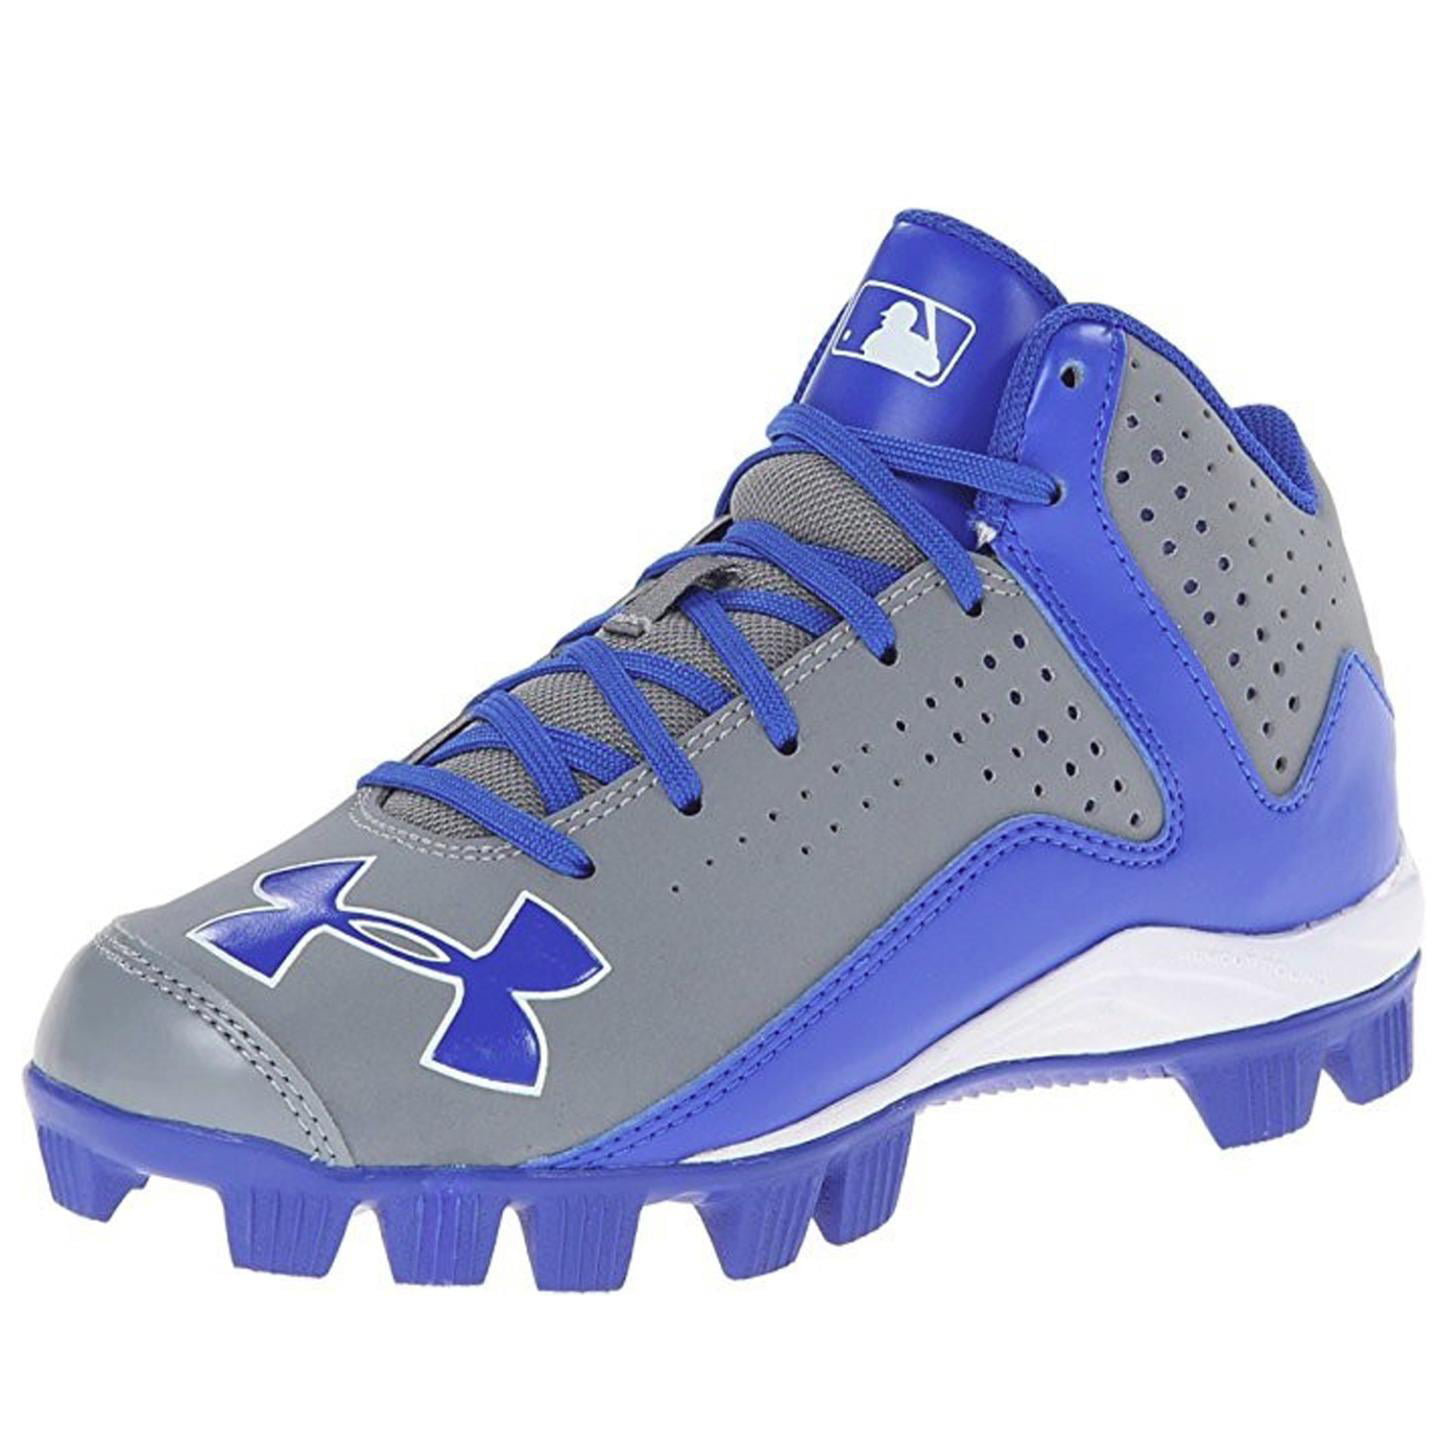 Under Armour Baseball Authentic Cleats No Box Size 8.5 Boys Youth Blue Black NEW 